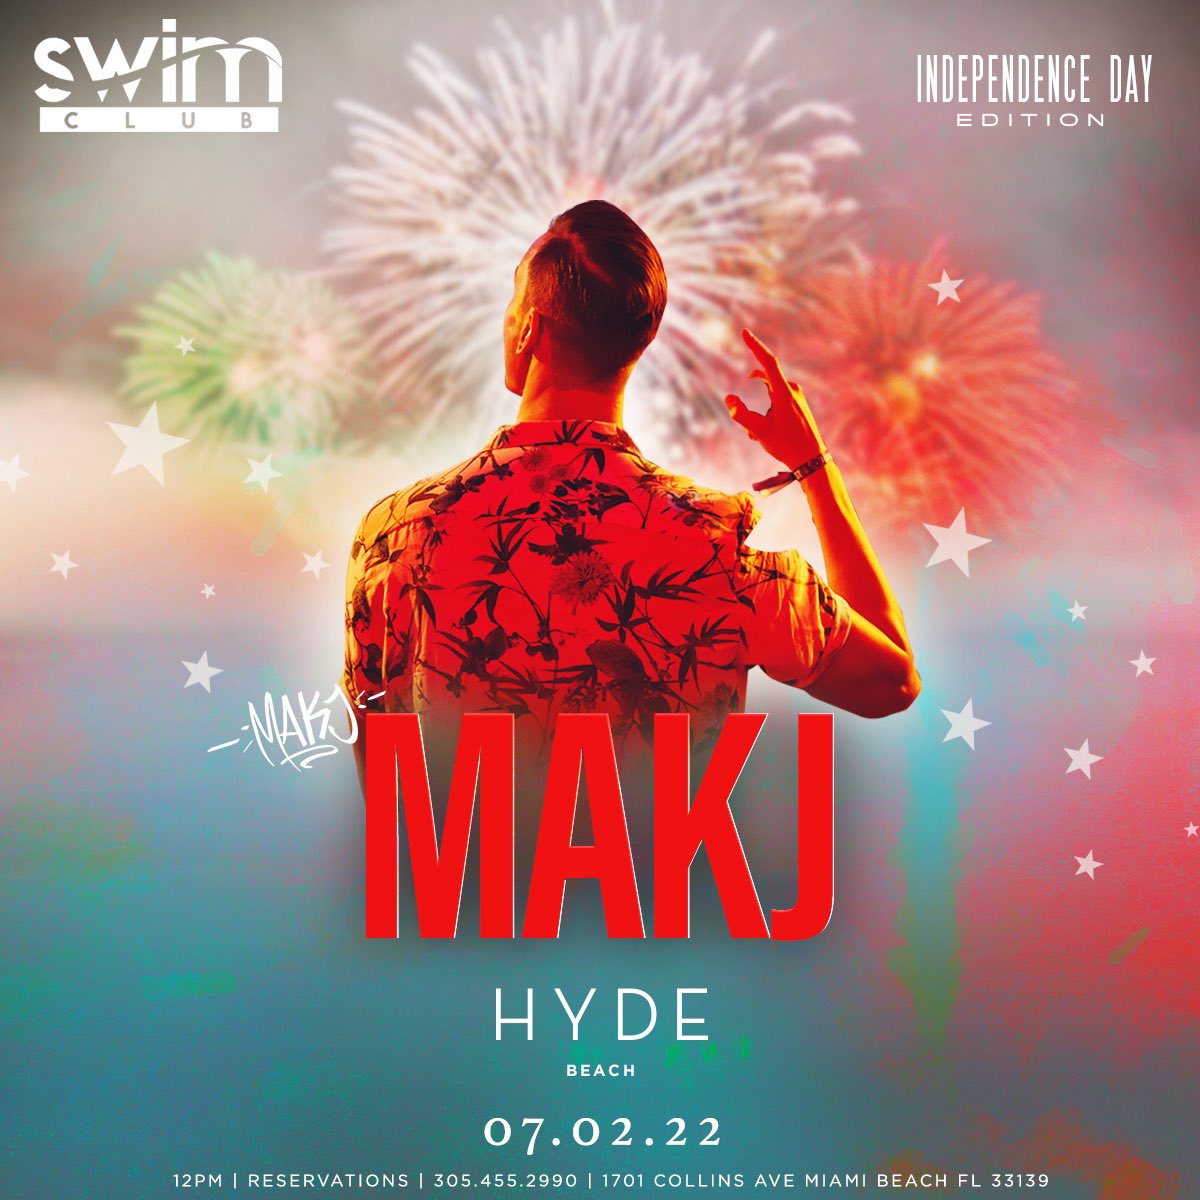 Our Annual Independence Weekend celebration kicks off with @MAKJ taking over Swim Club! 💦💥Saturday, July 2nd 🎧 For tickets visit tixr.com/e/45333